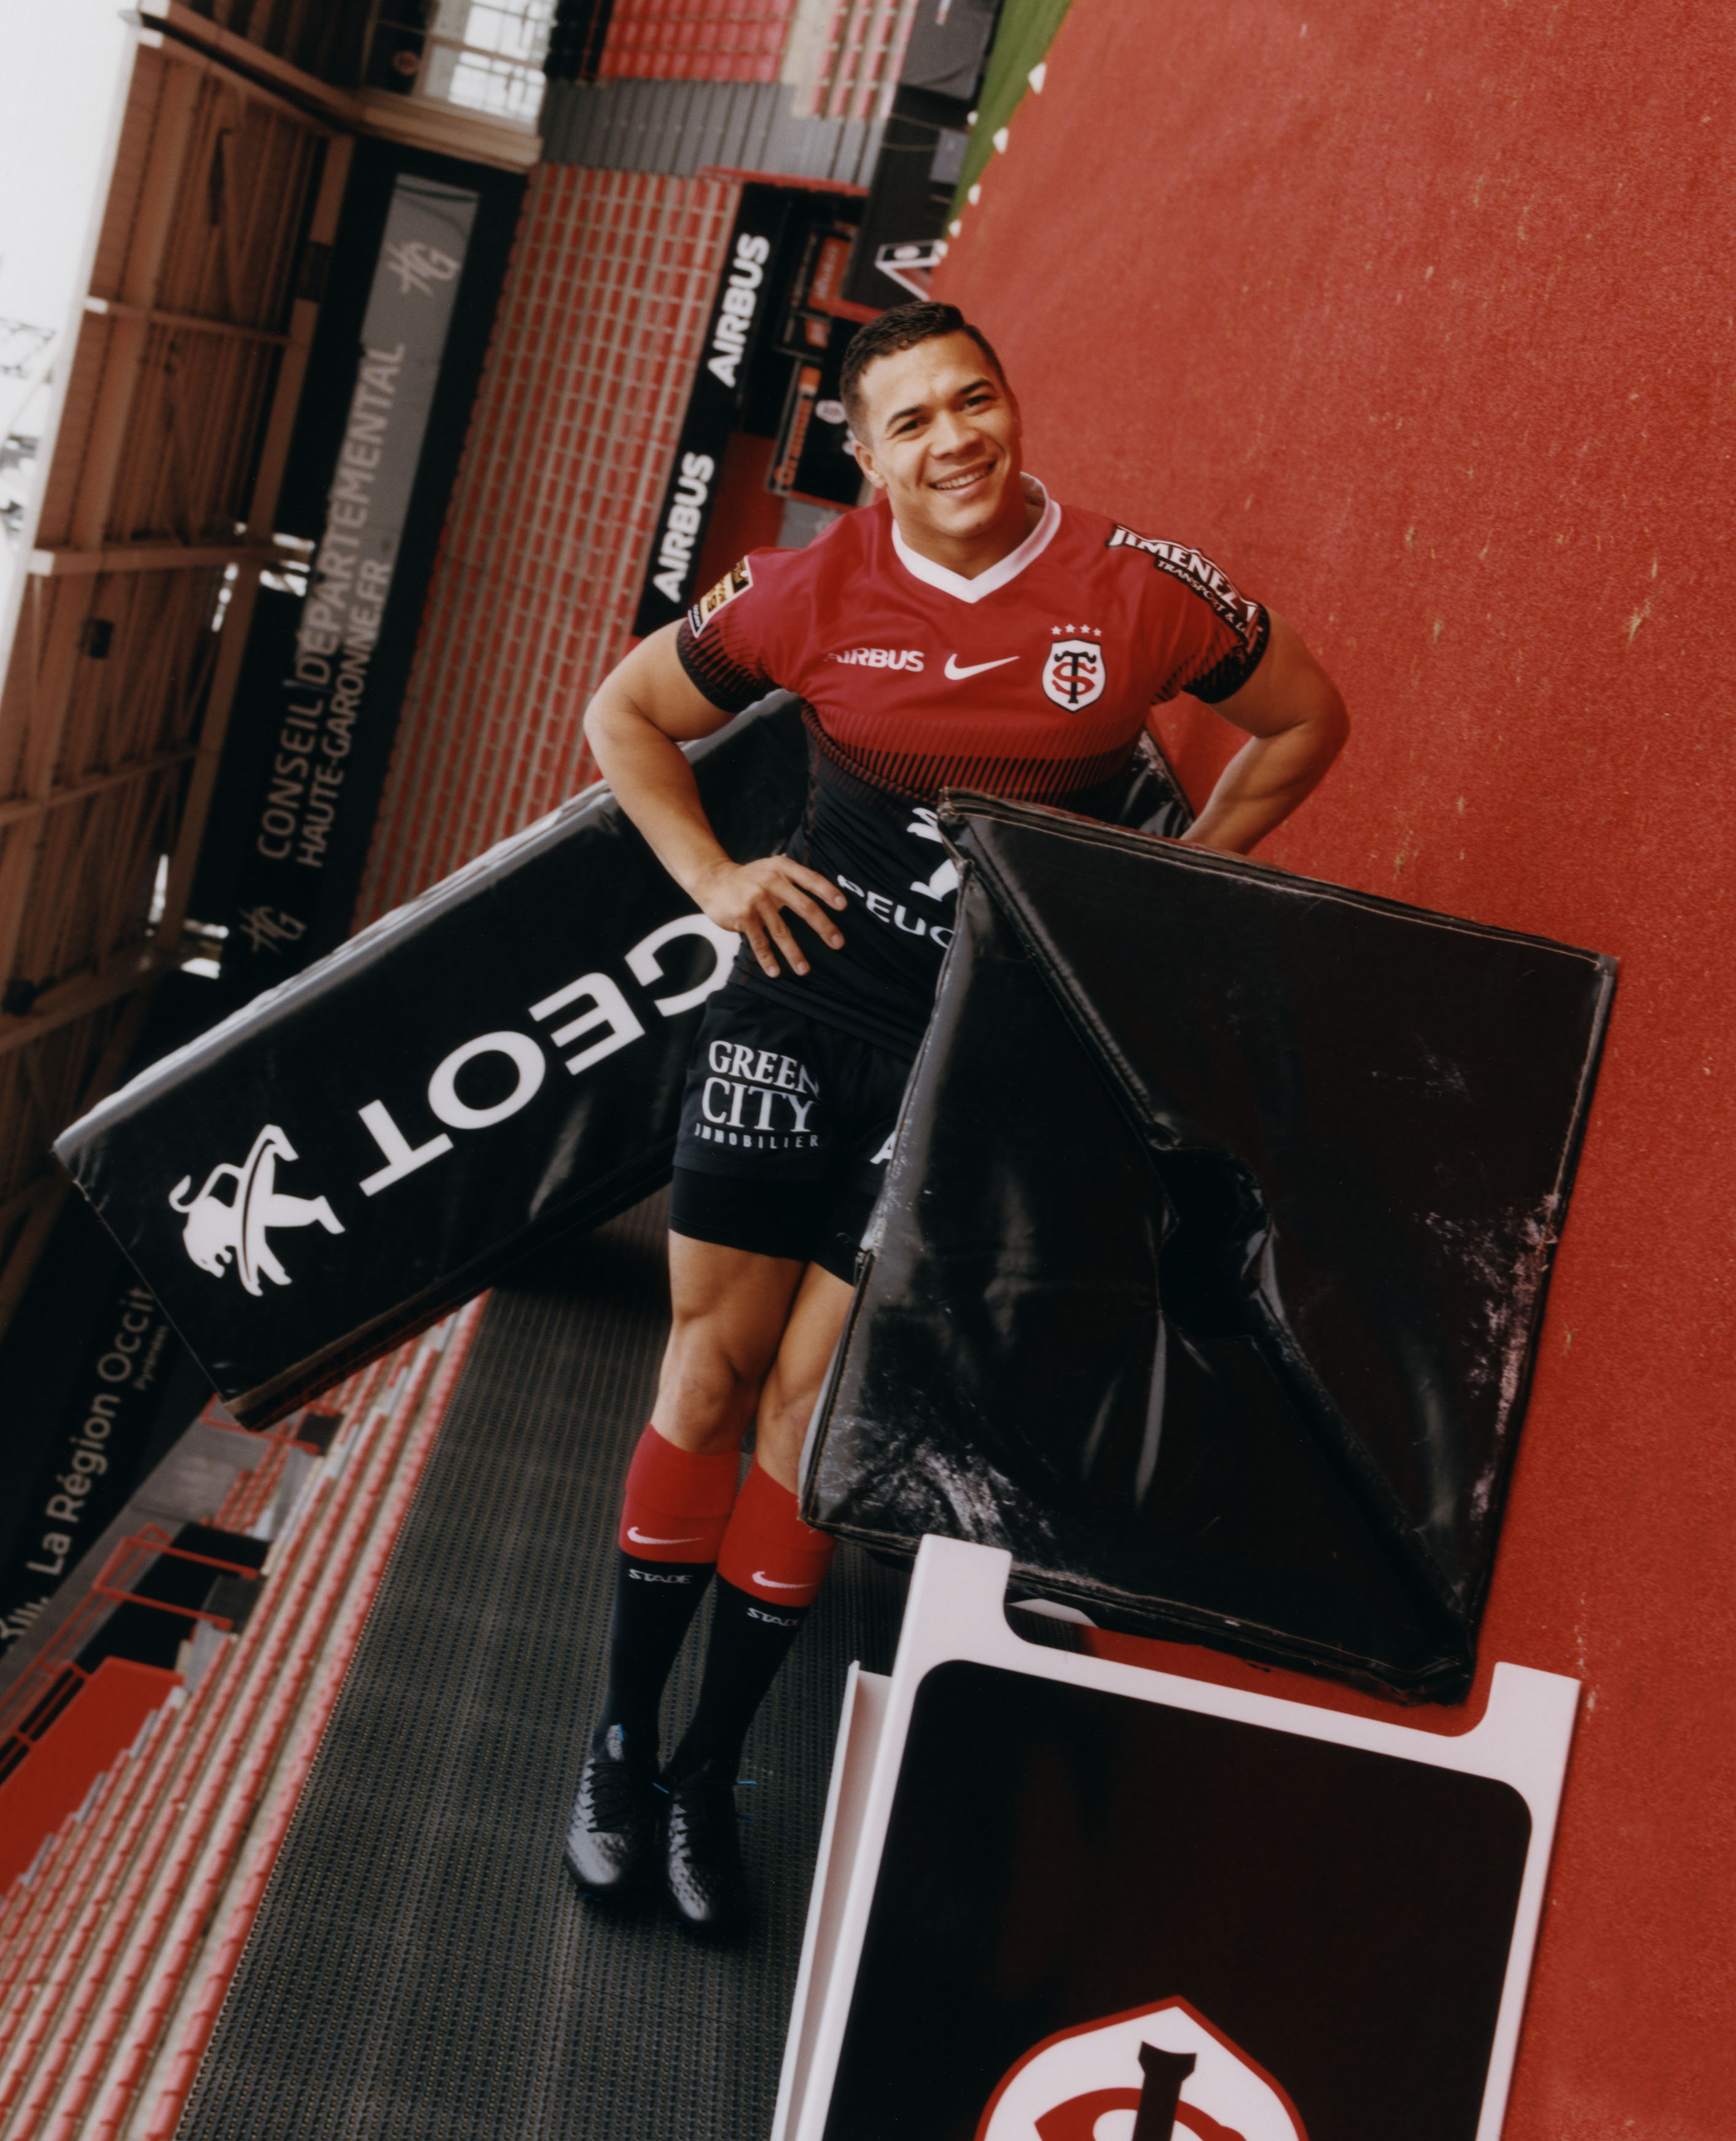 I photographed South African rugby player Cheslin Kolbe for *L’Equipe magazine* at at the Stade Ernest-Wallon in Toulouse. To make the most of his core strength, I asked him to hold the pose like this for almost a minute: easy. e - © Maciek Pożoga